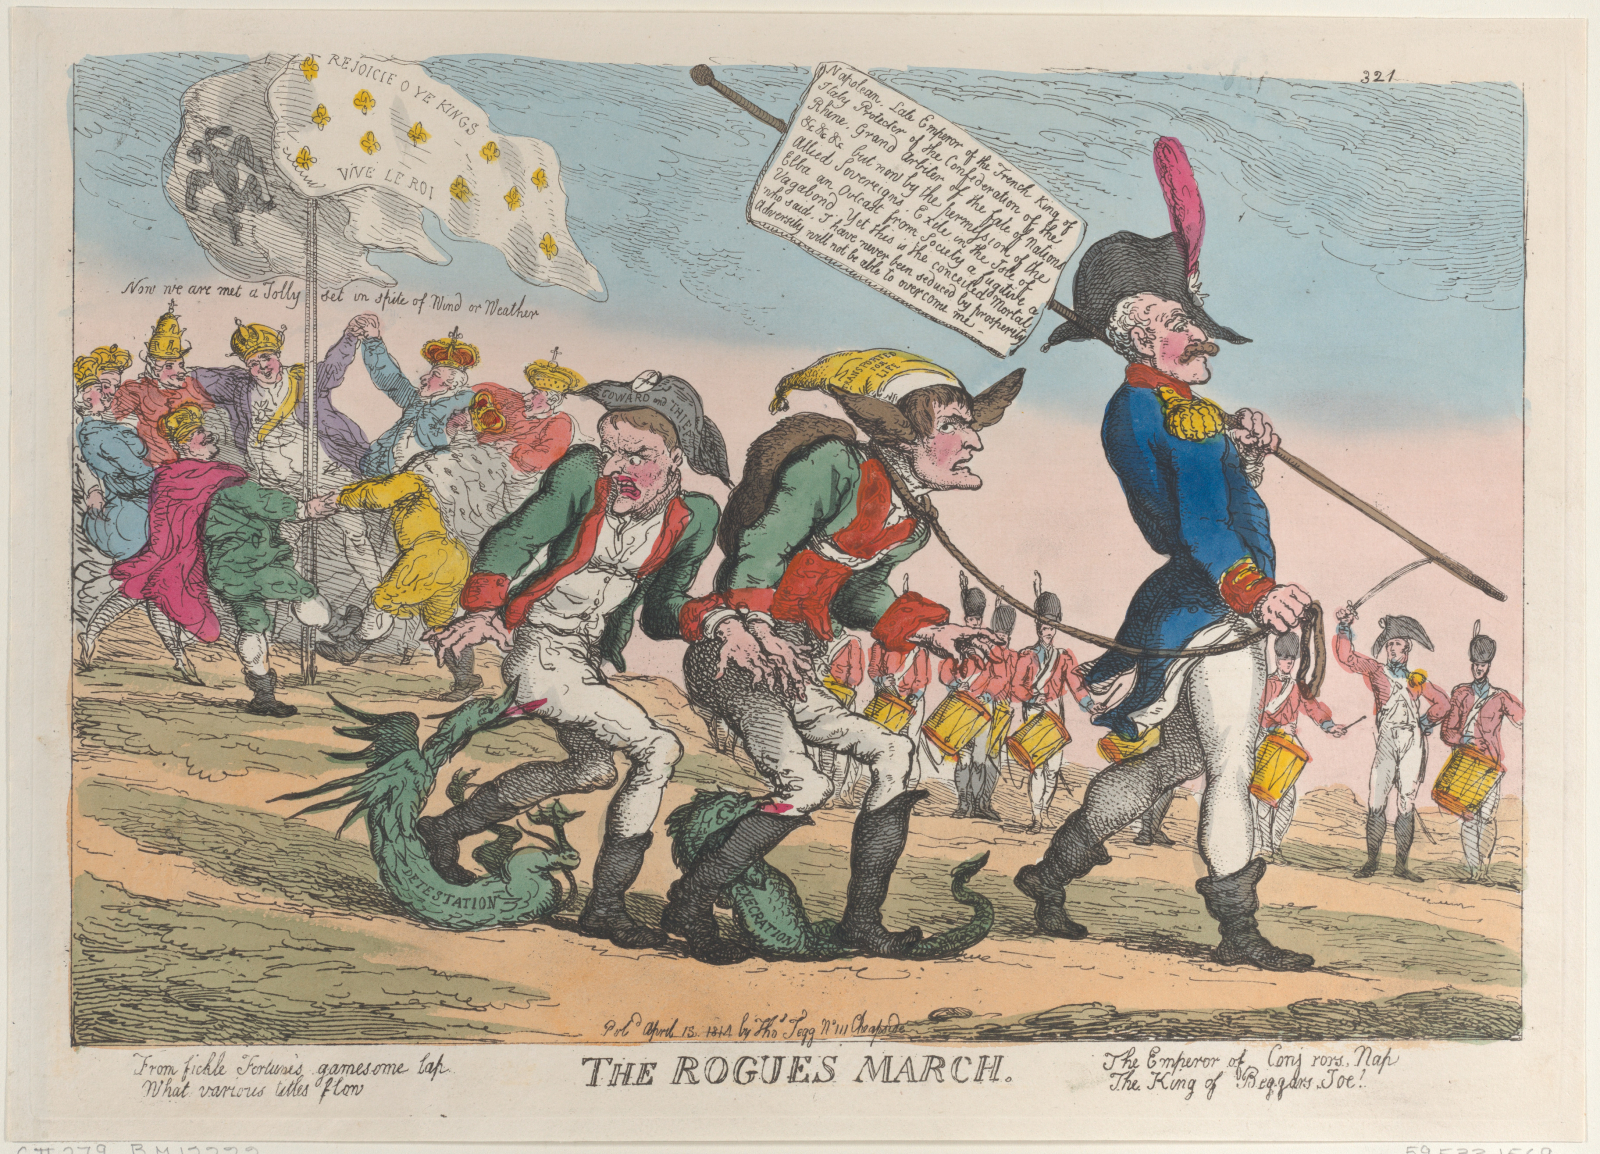 The Rogues March, Thomas Rowlandson, 1814